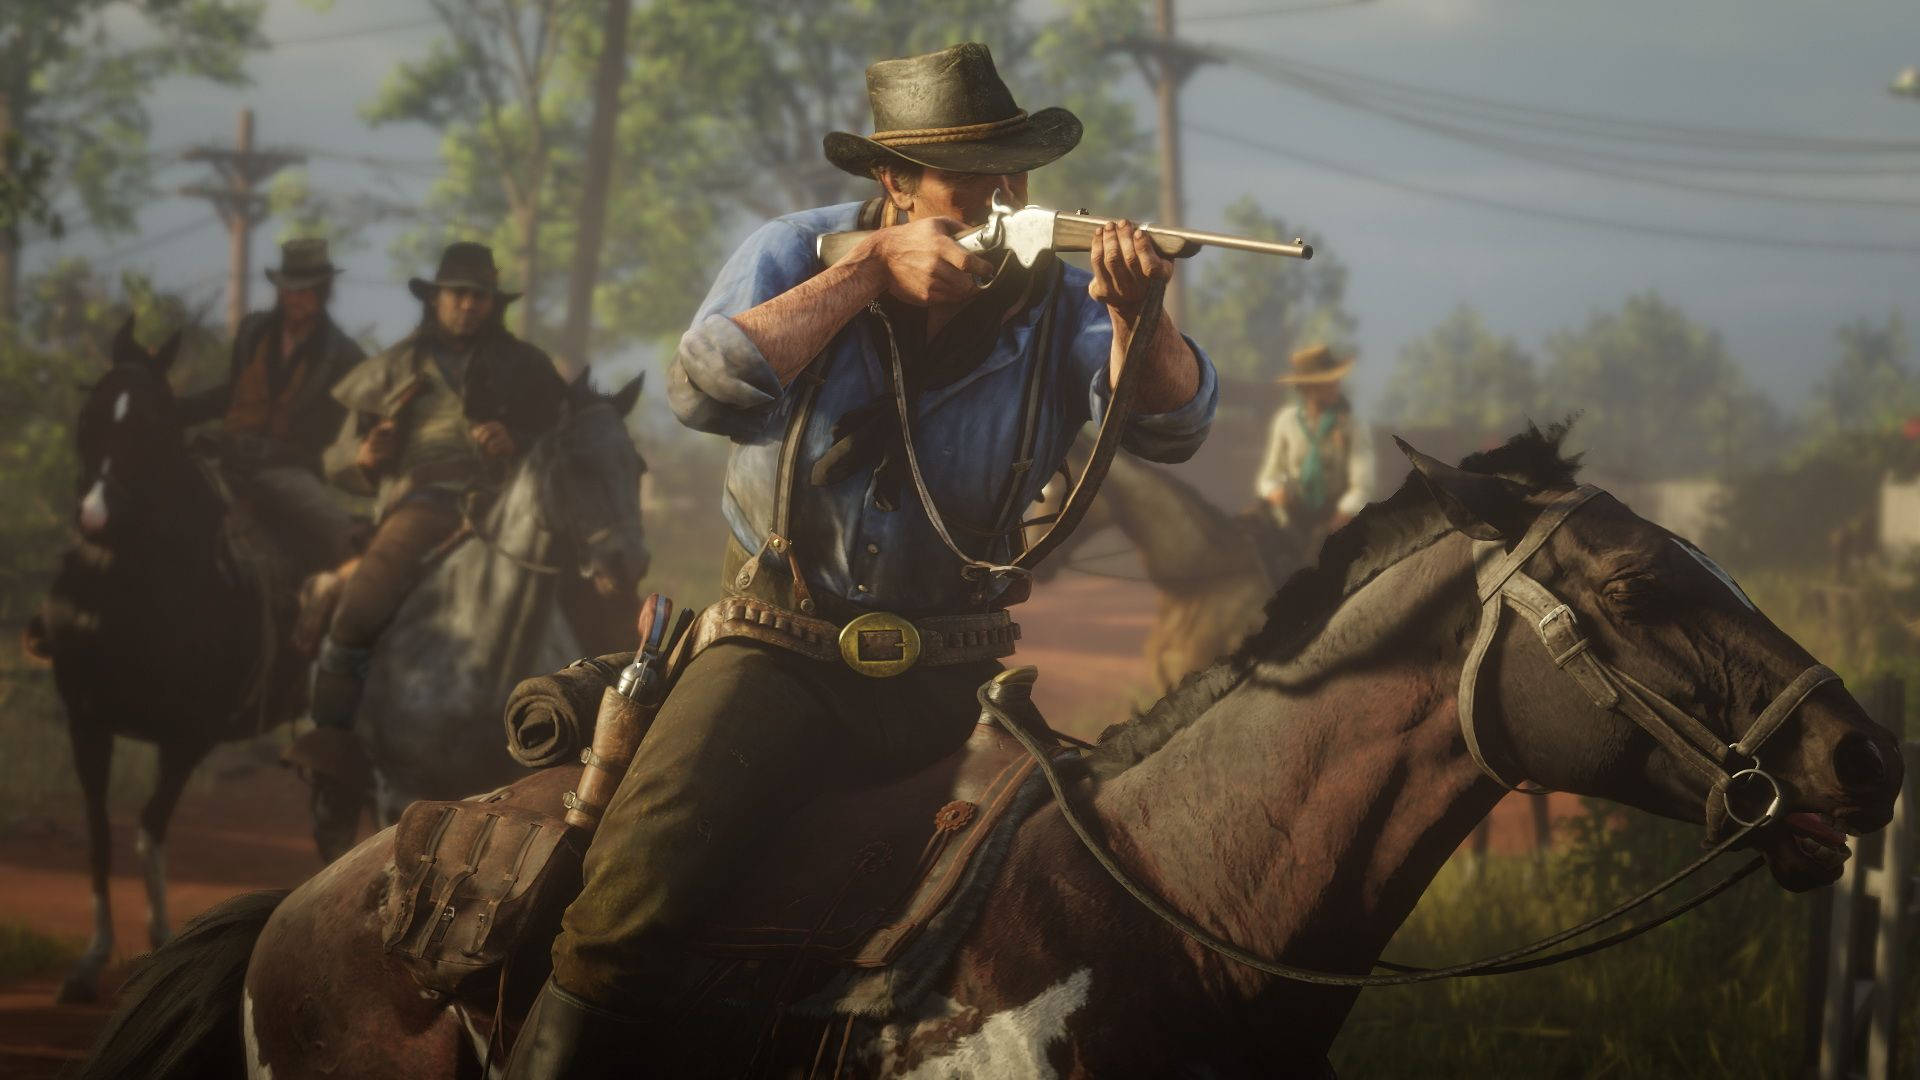 Feel the freedom of the wild west with your trusty steed in Red Dead Redemption 2. Wallpaper